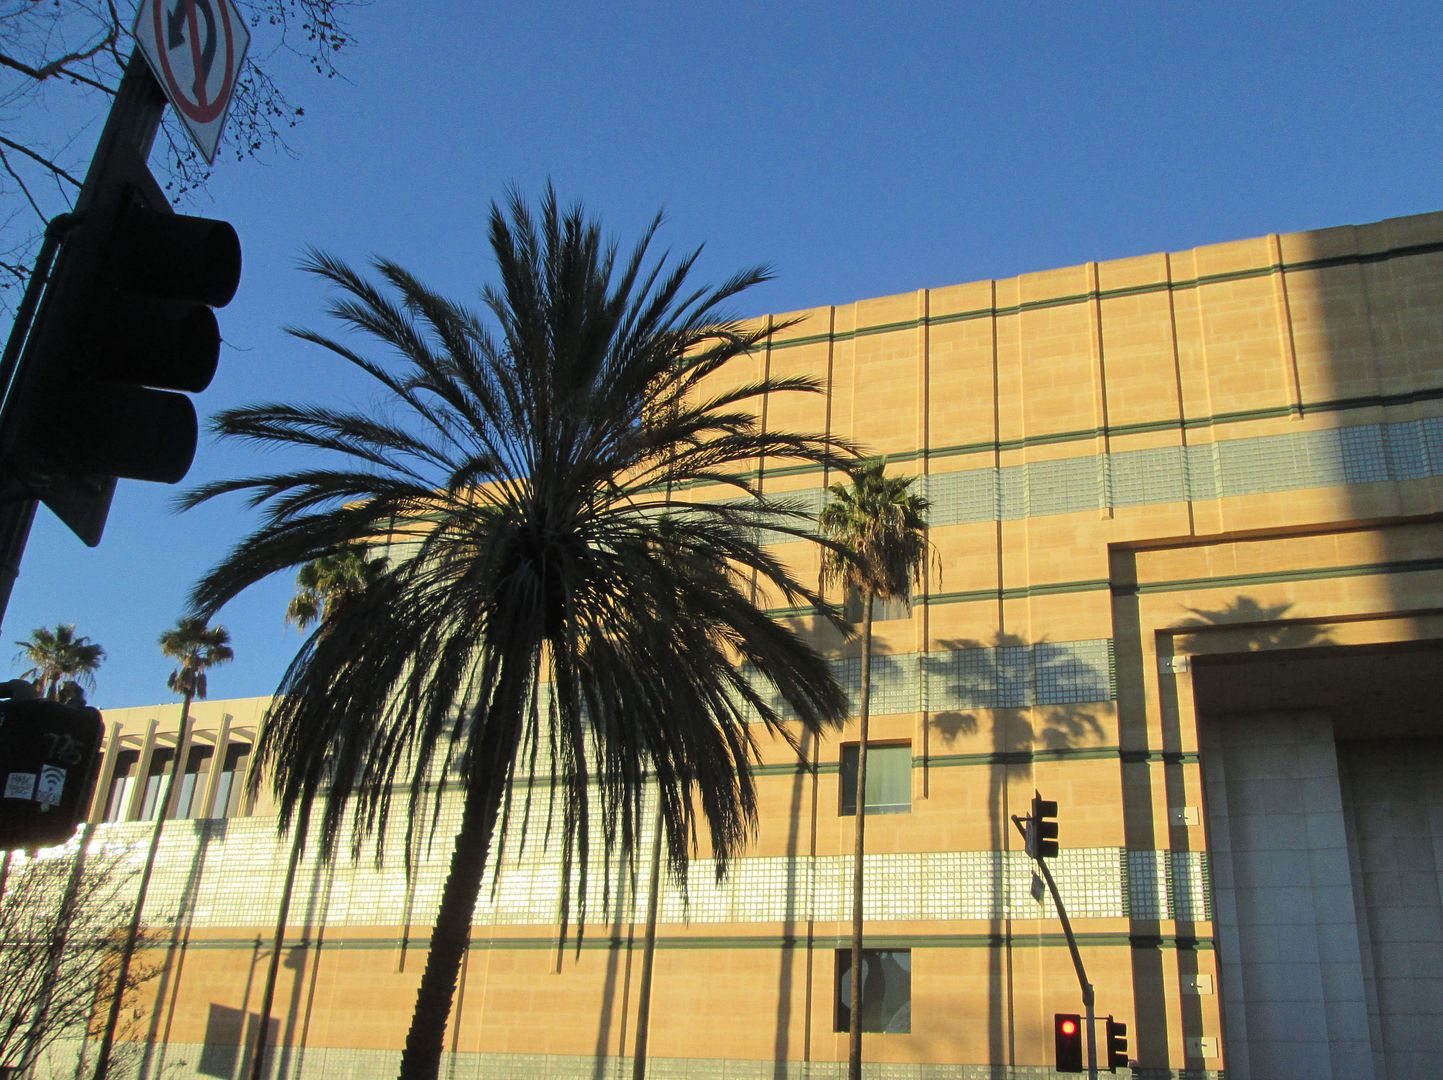 LACMA with palms and traffic signal silhouette